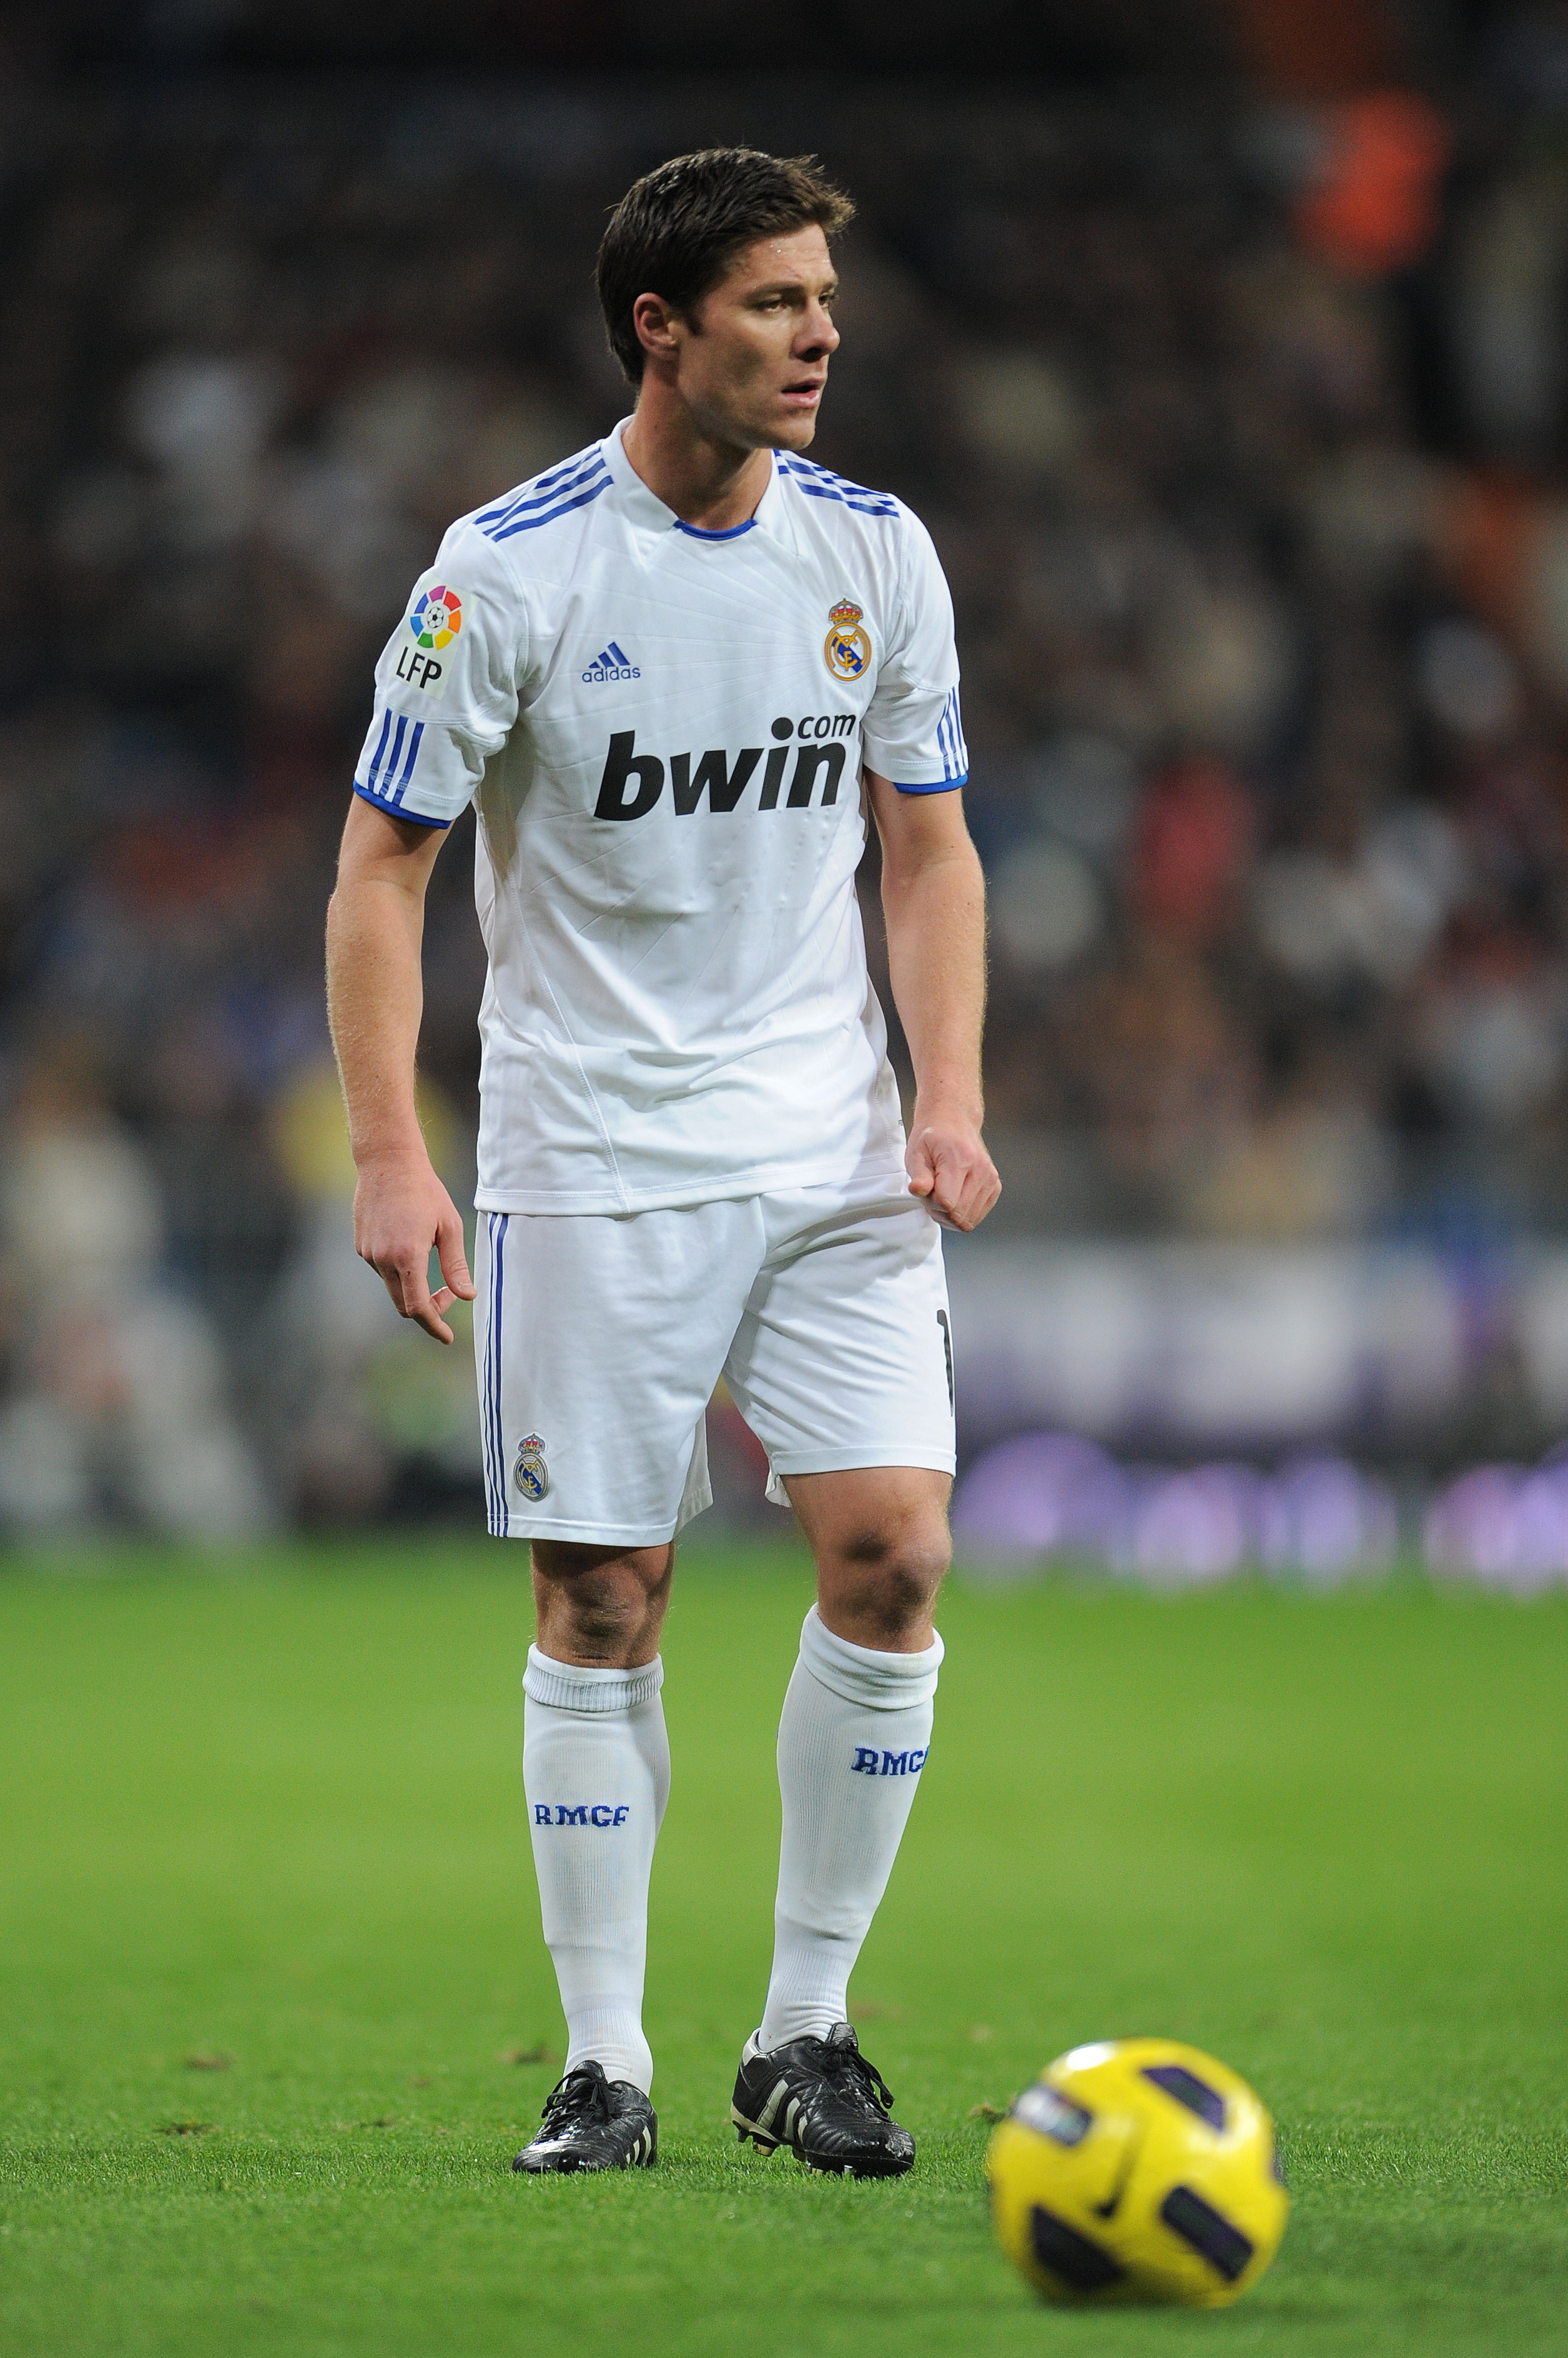 MADRID, SPAIN - DECEMBER 04:  Xabi Alonso of Real Madrid lines up a free kick during the La Liga match between Real Madrid and Valencia at Estadio Santiago Bernabeu on December 4, 2010 in Madrid, Spain.  (Photo by Jasper Juinen/Getty Images)